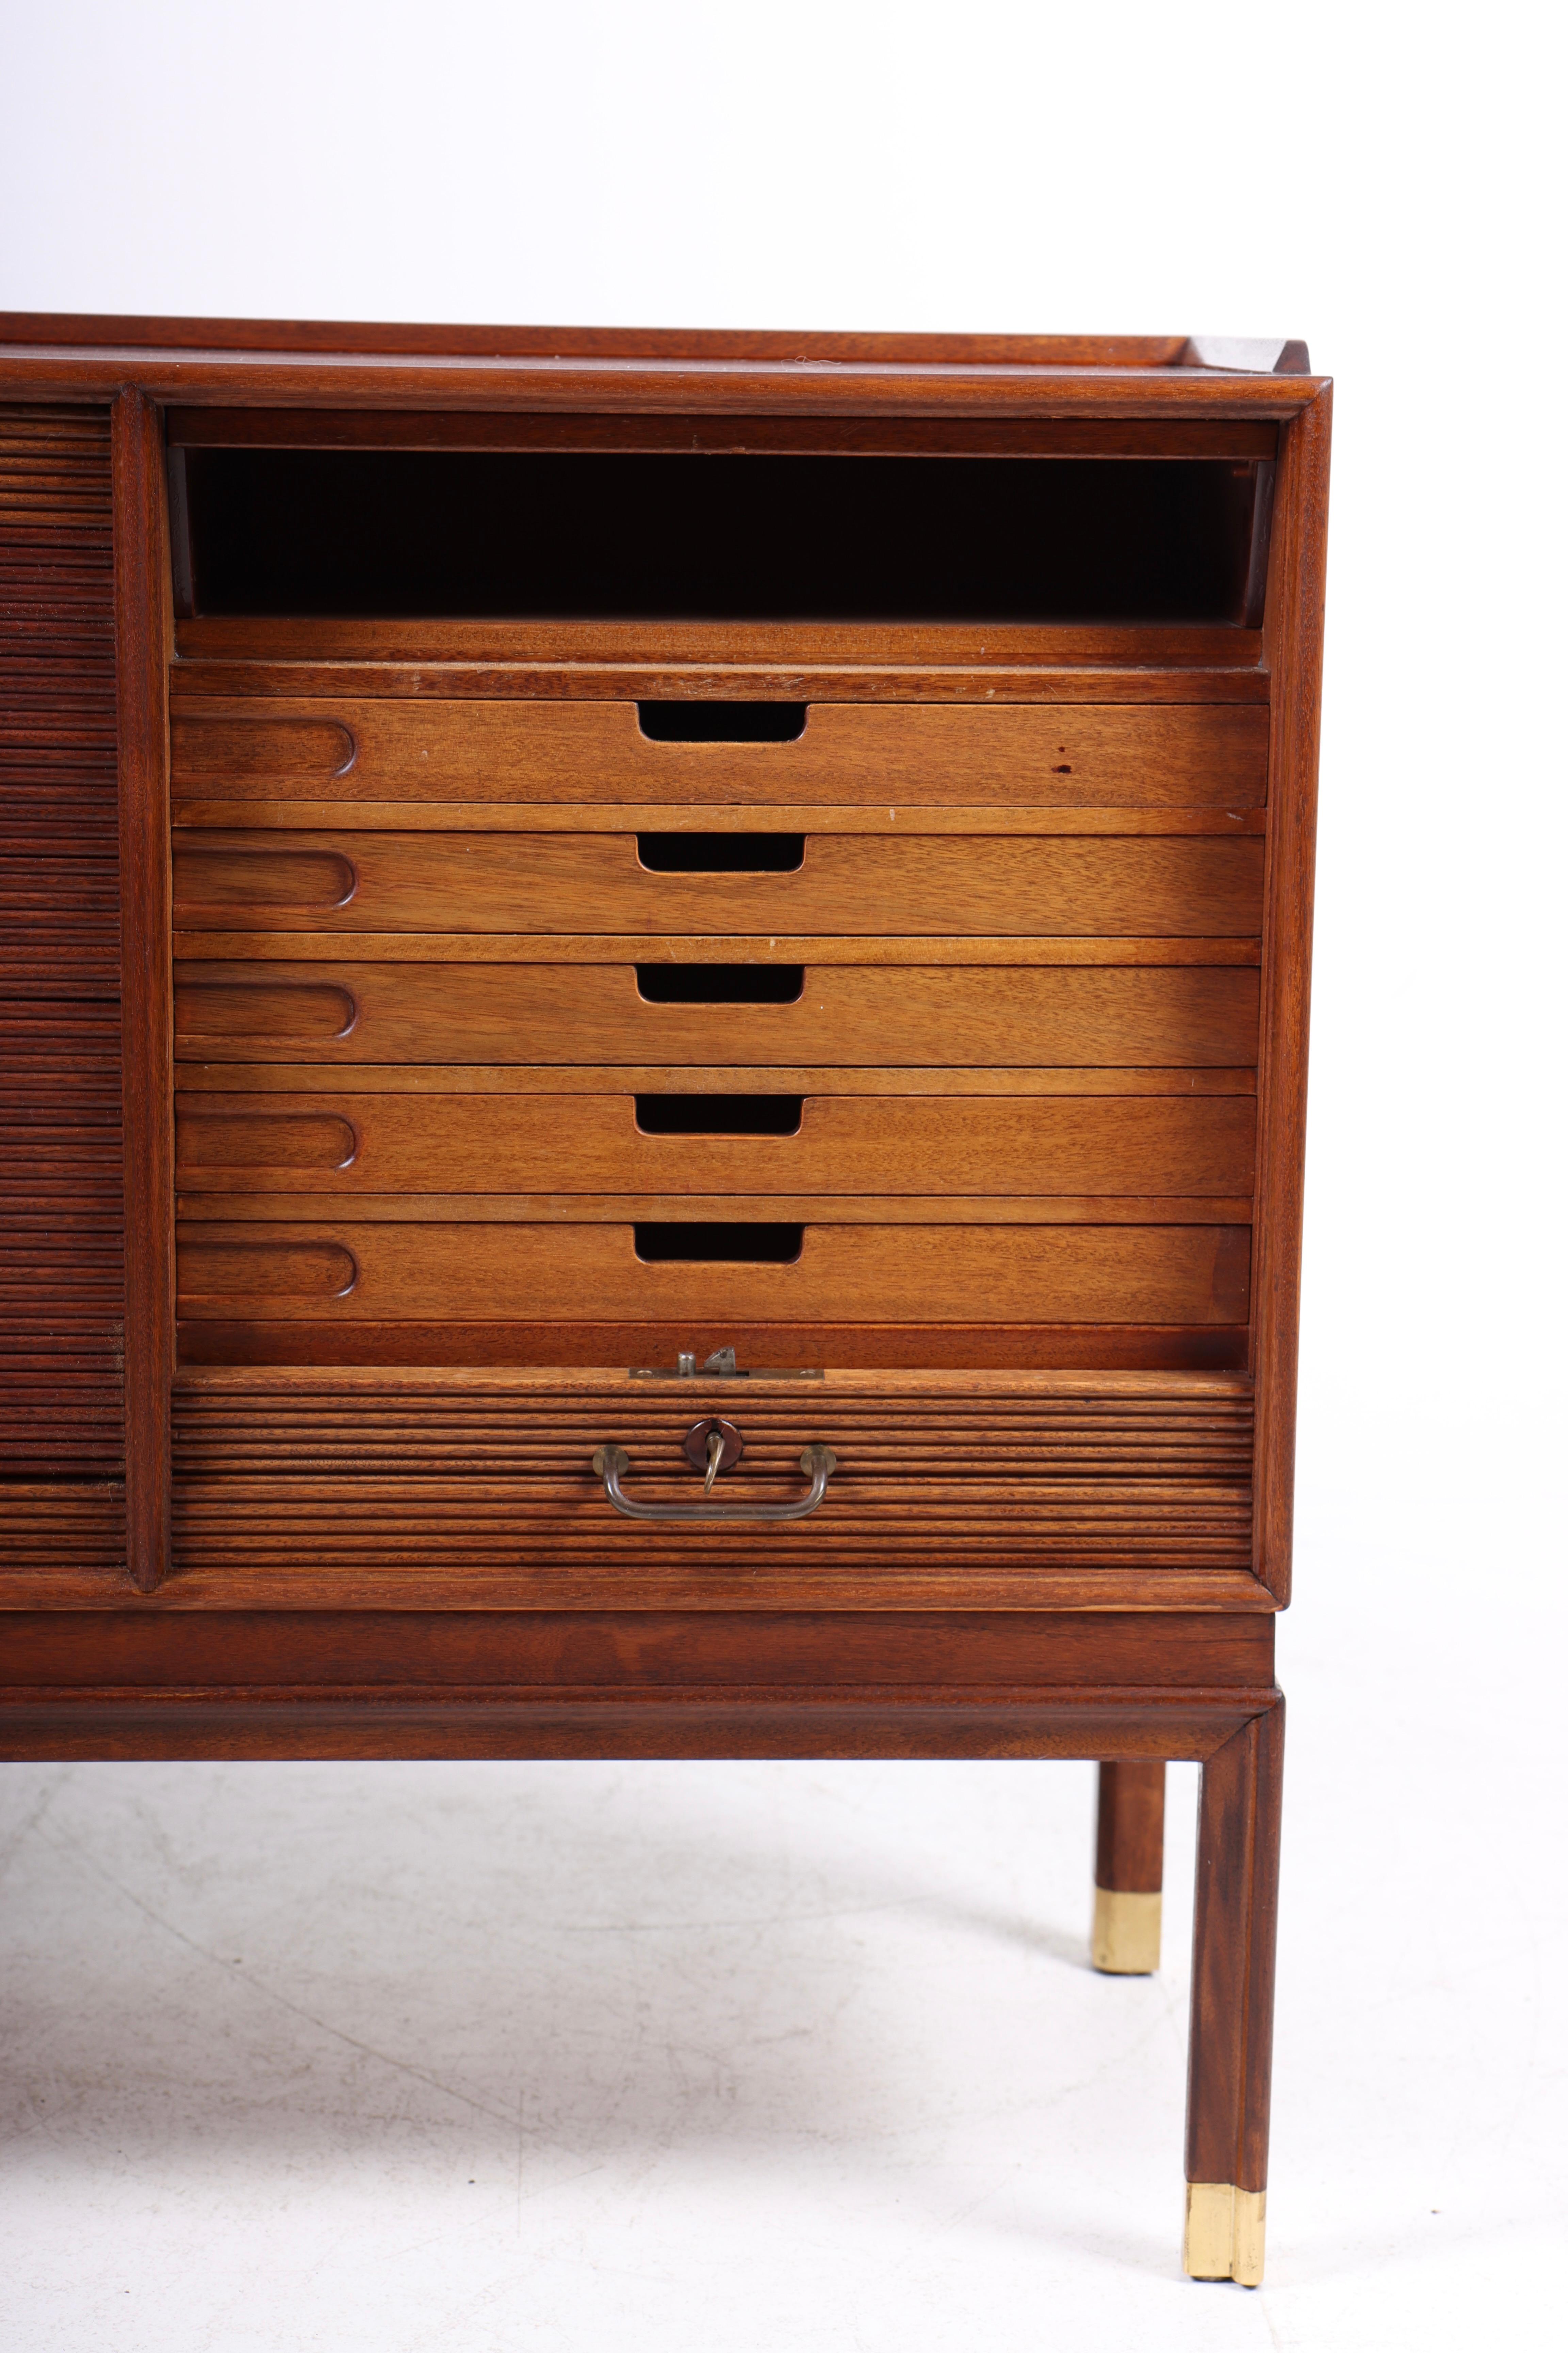 Danish Midcentury File Cabinet in Mahogany with Tambour Doors, 1950s For Sale